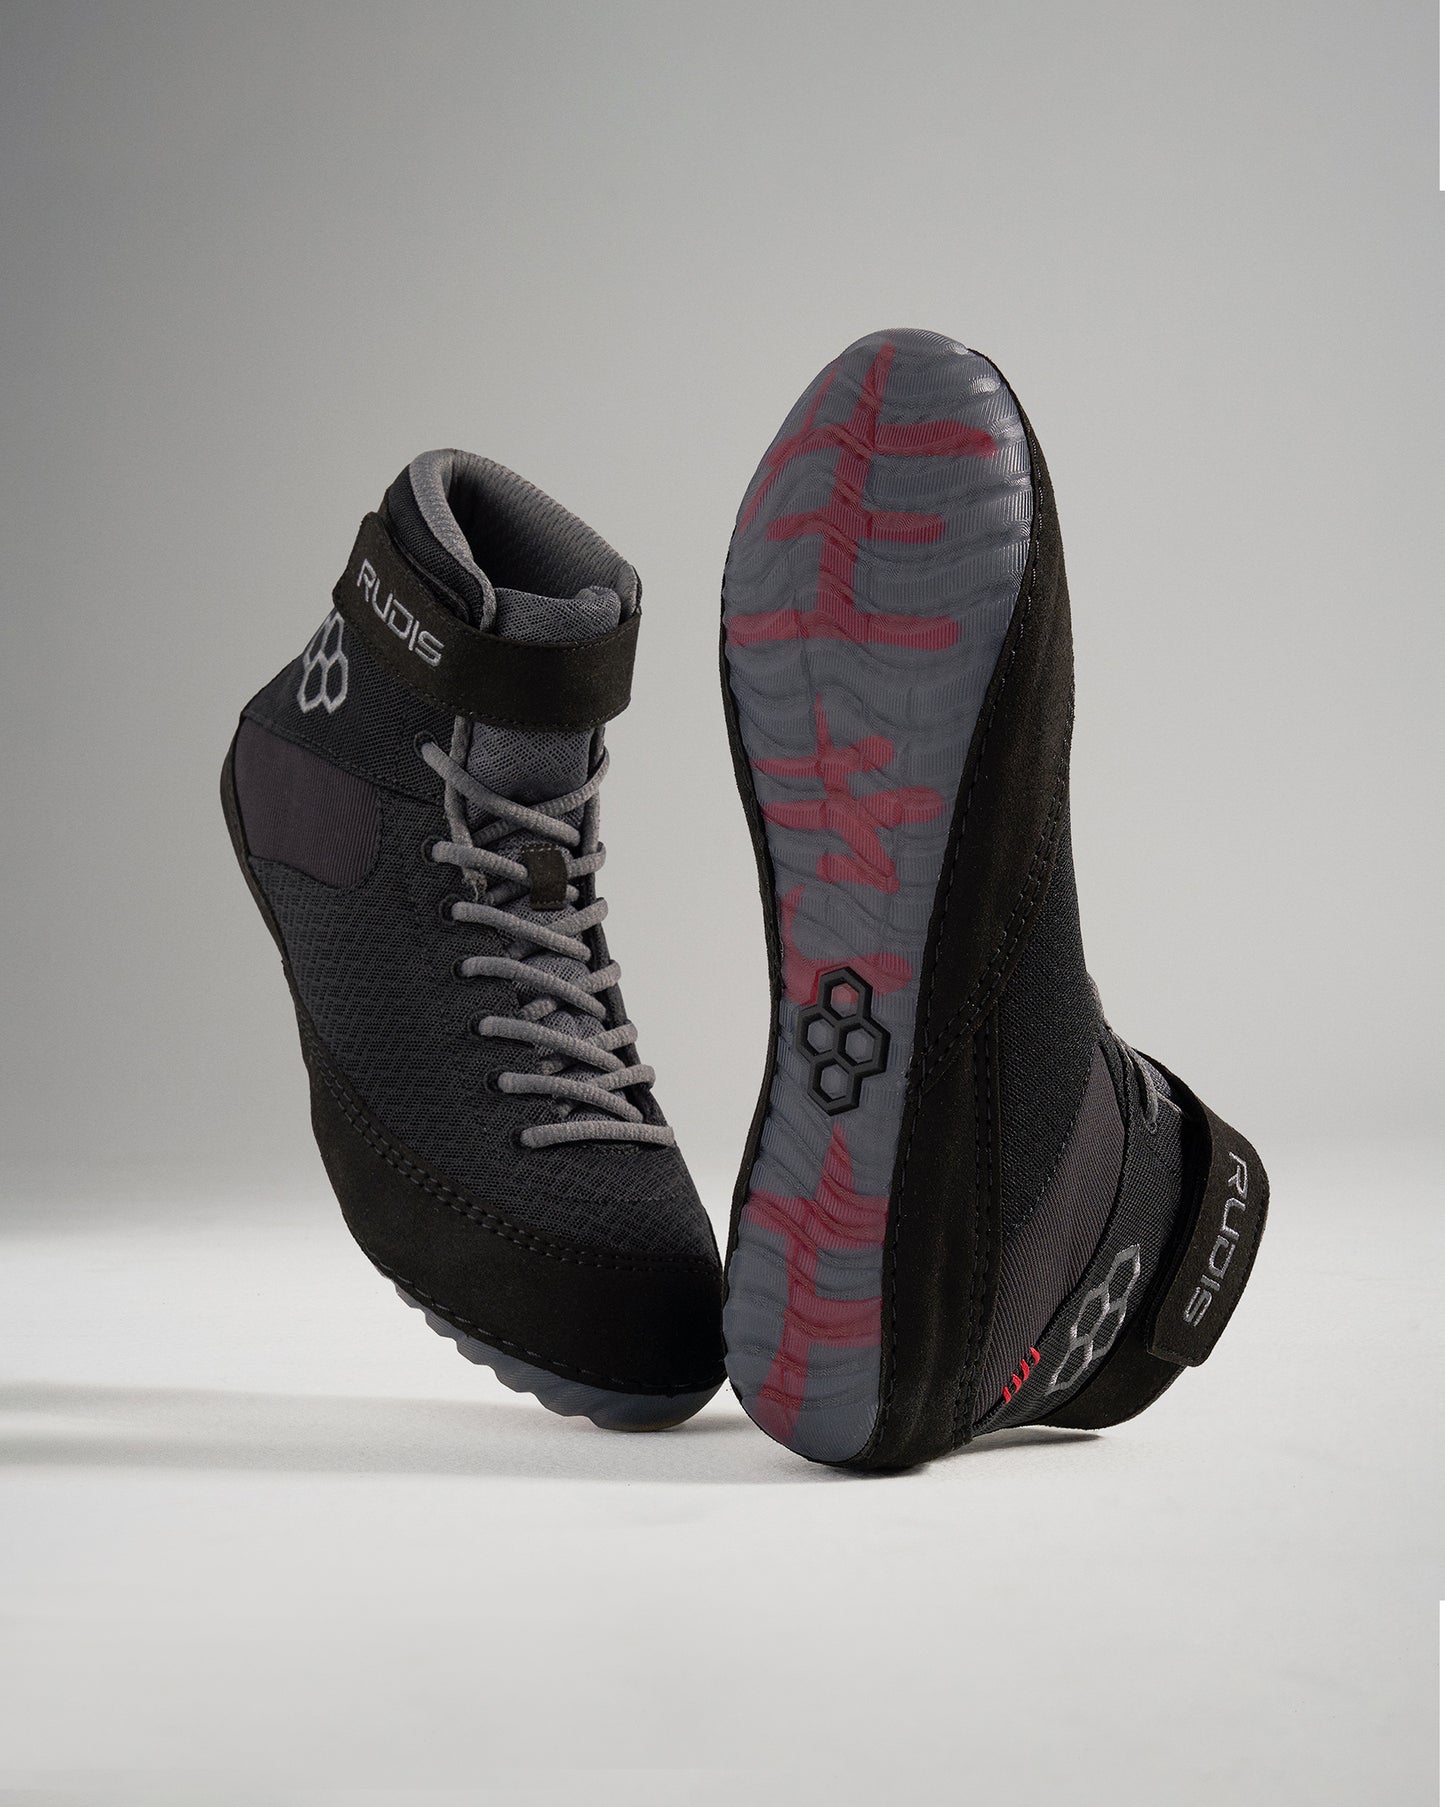 Samurai Speed Adult Wrestling Shoes - The Way